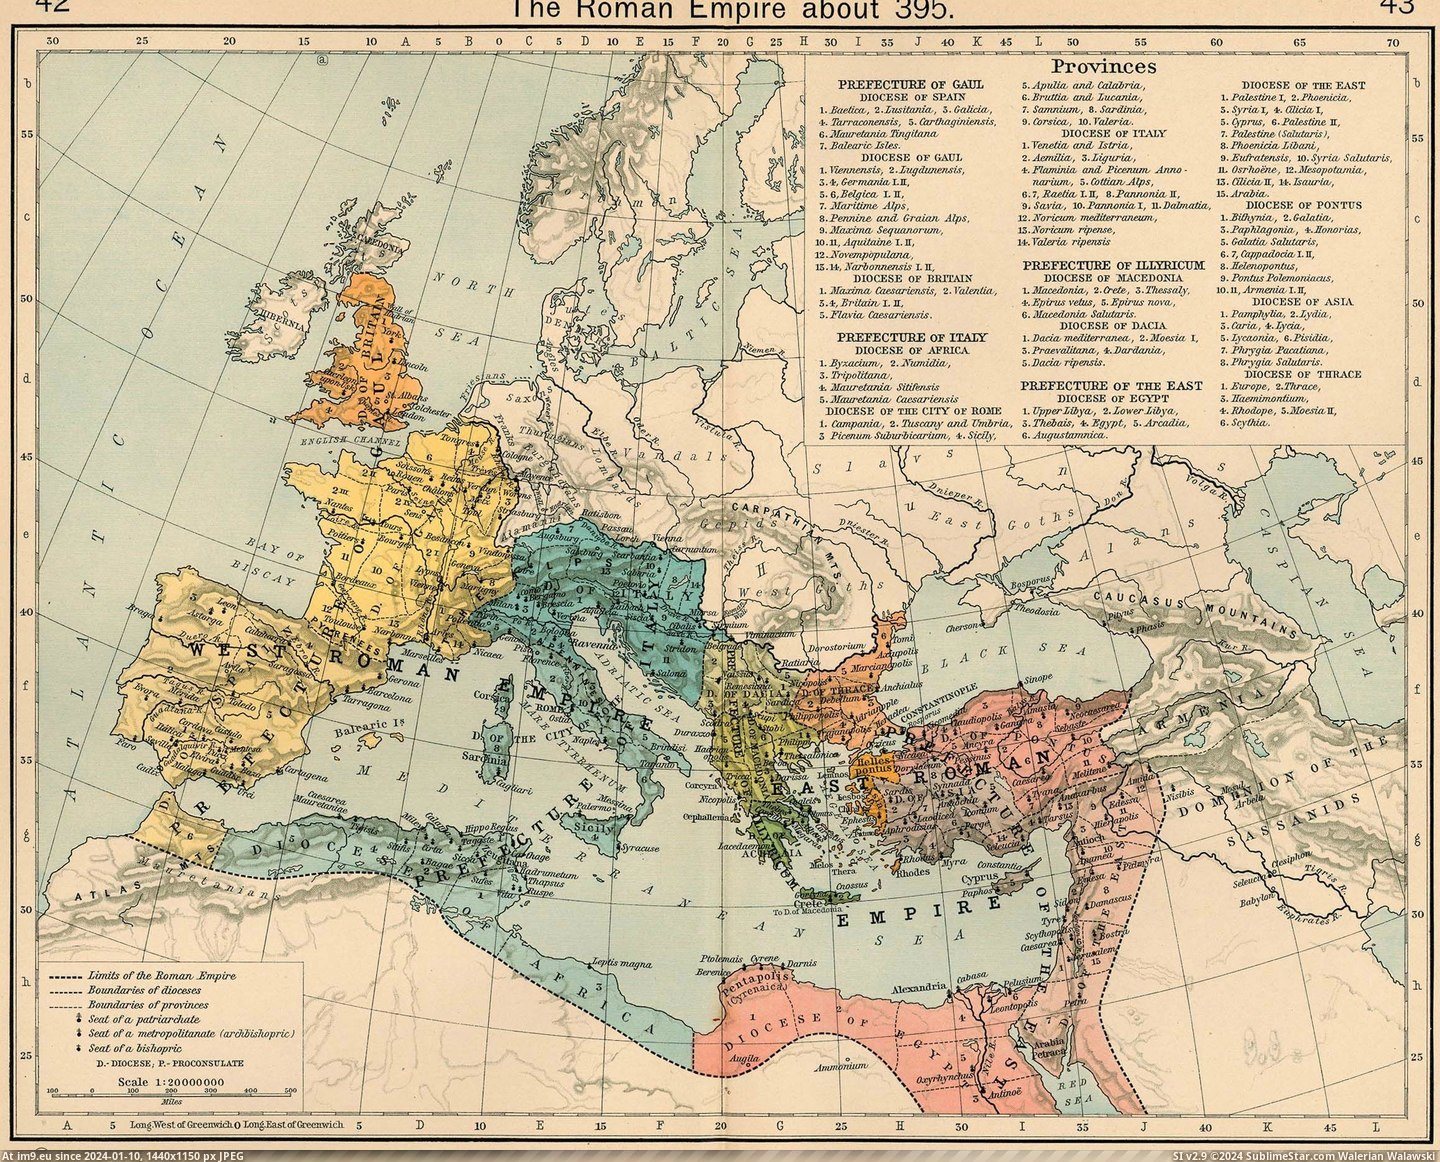 #Historical #Roman #Atlas #Empire [Mapporn] Roman Empire at 395 CE, from 'The Historical Atlas', 1911 - [2316x1861] Pic. (Изображение из альбом My r/MAPS favs))